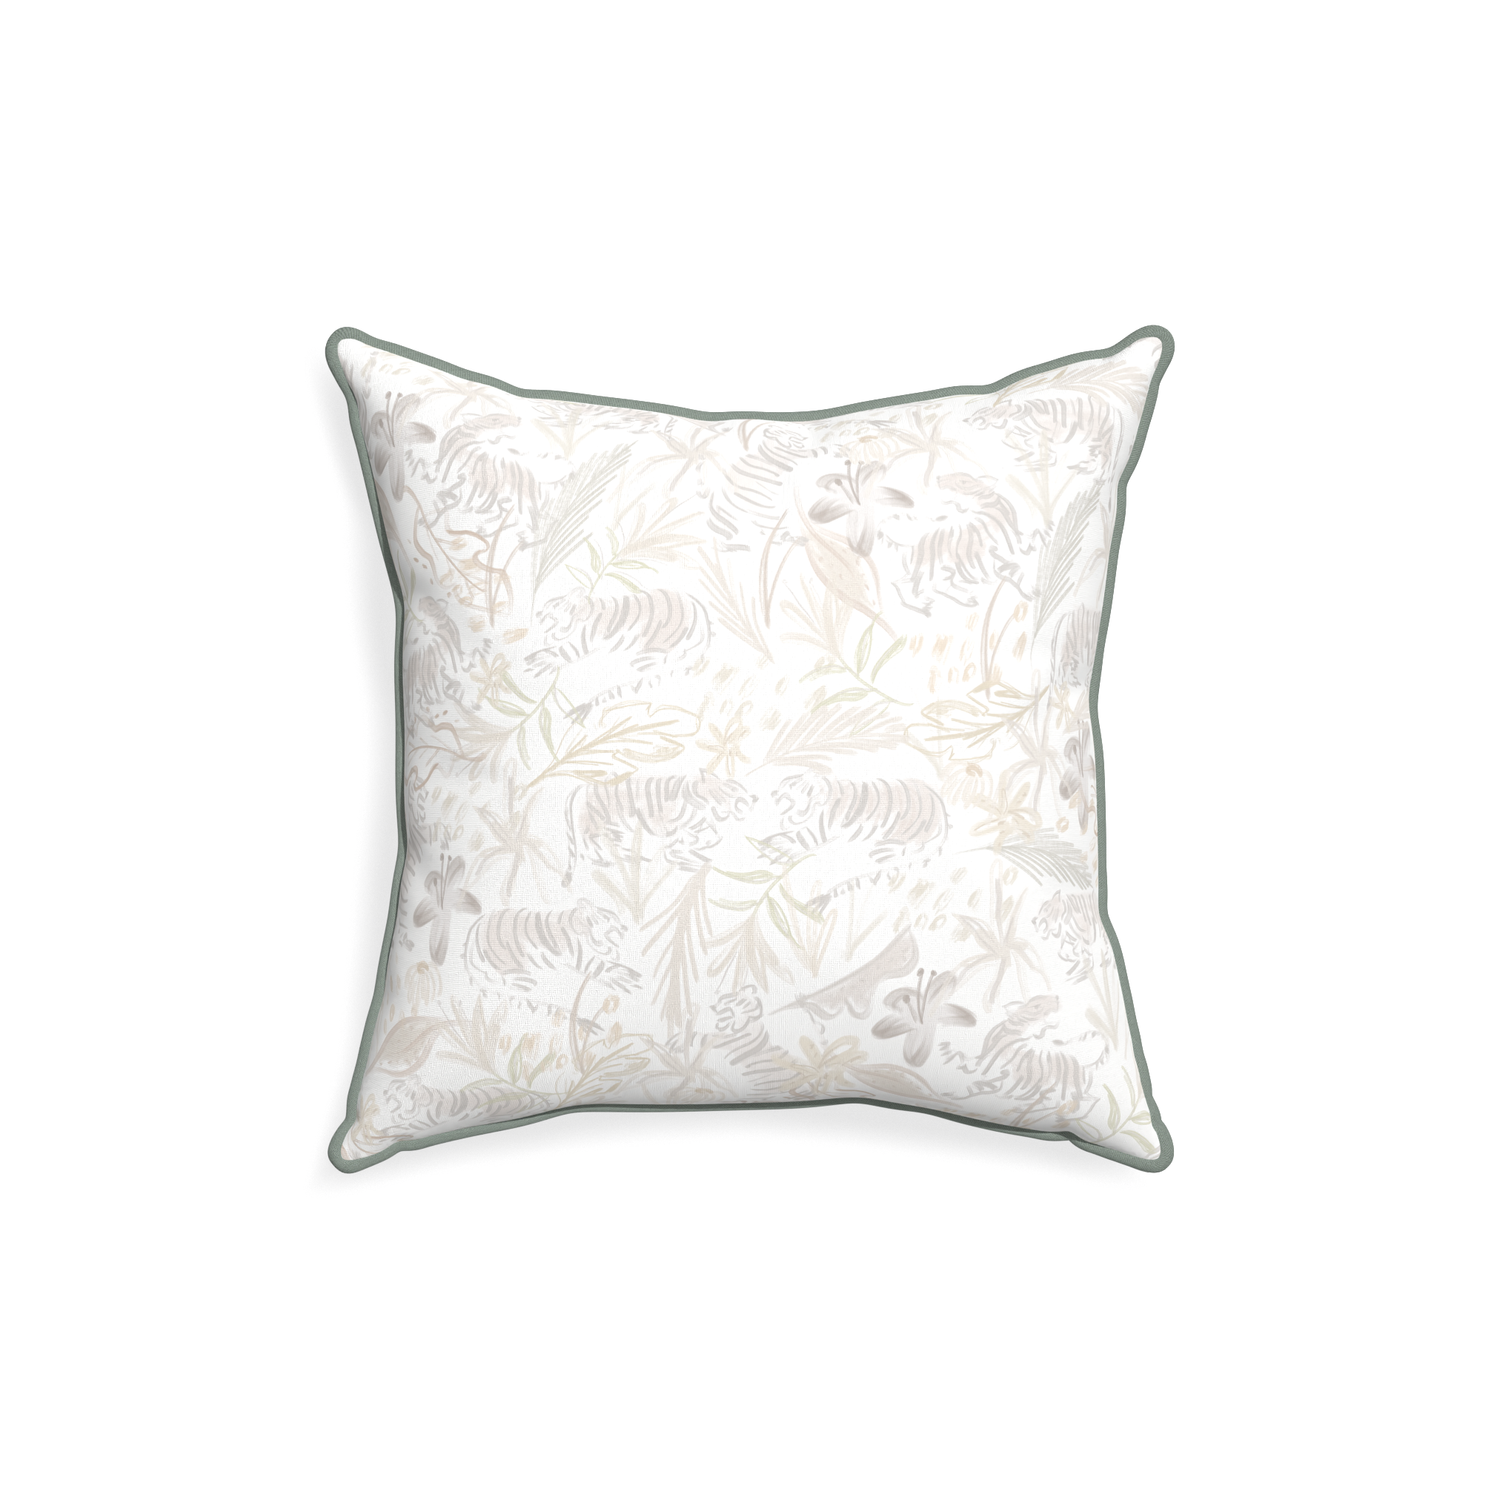 18-square frida sand custom beige chinoiserie tigerpillow with sage piping on white background